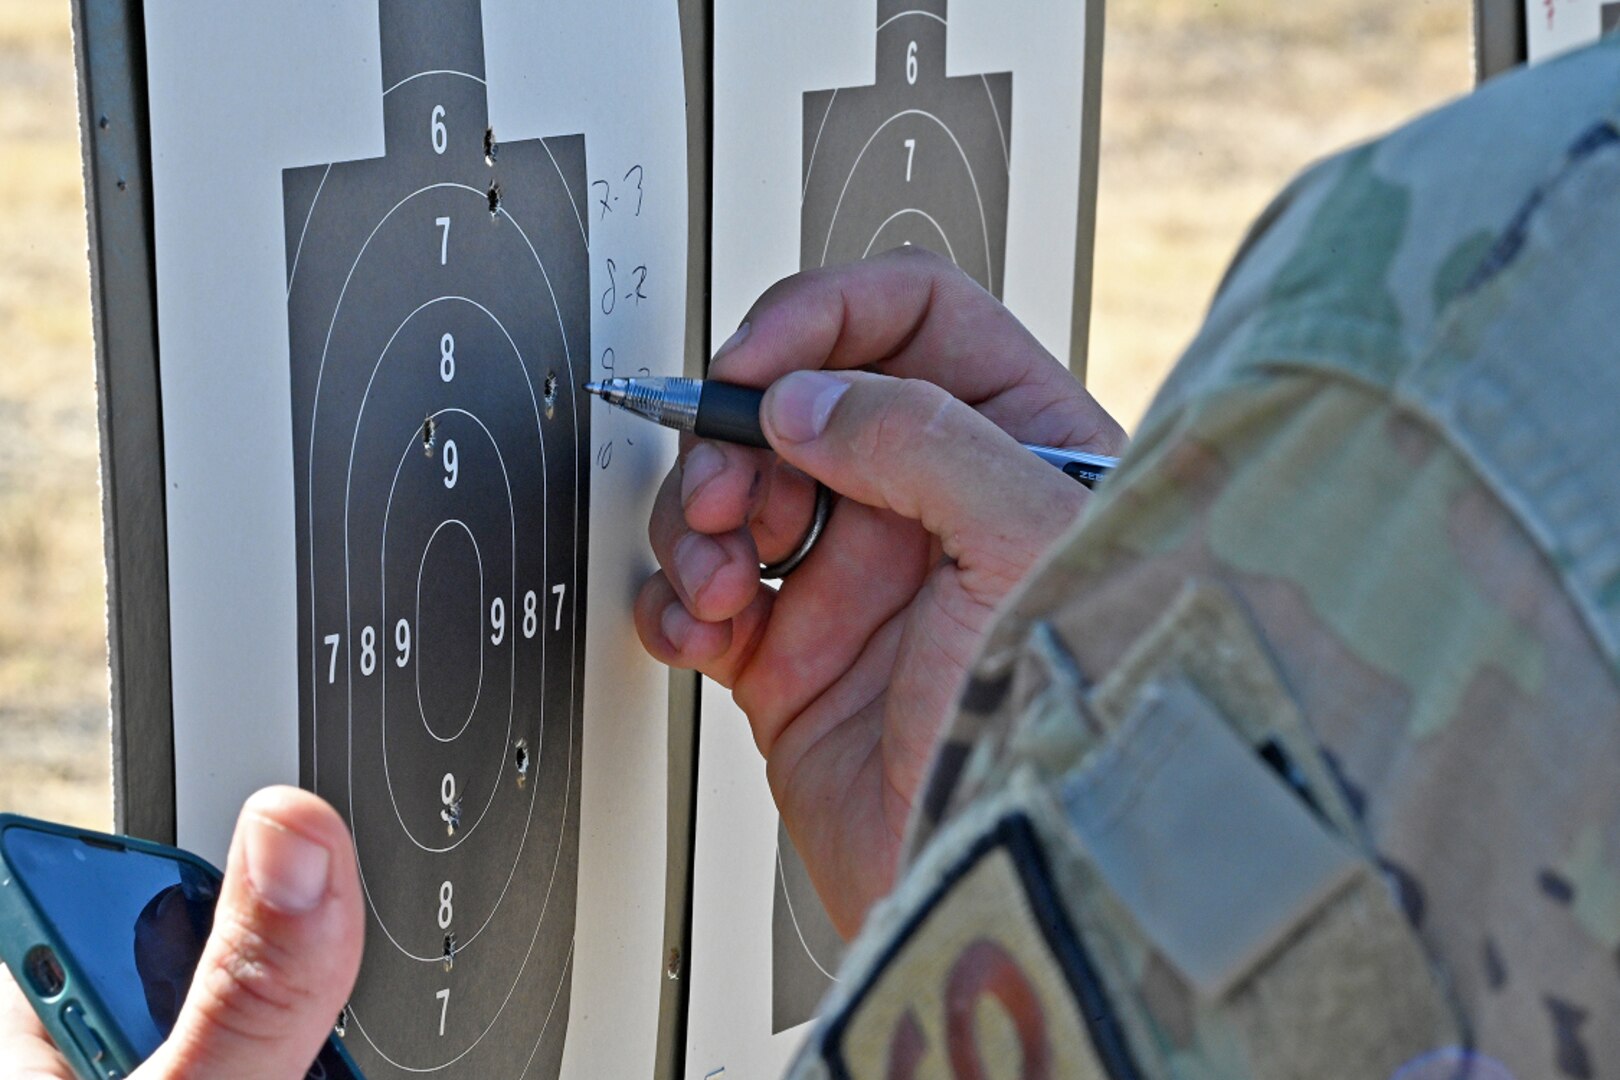 JBSA-Chapman Training Annex hosts Excellence in Competition Rifle Shoot